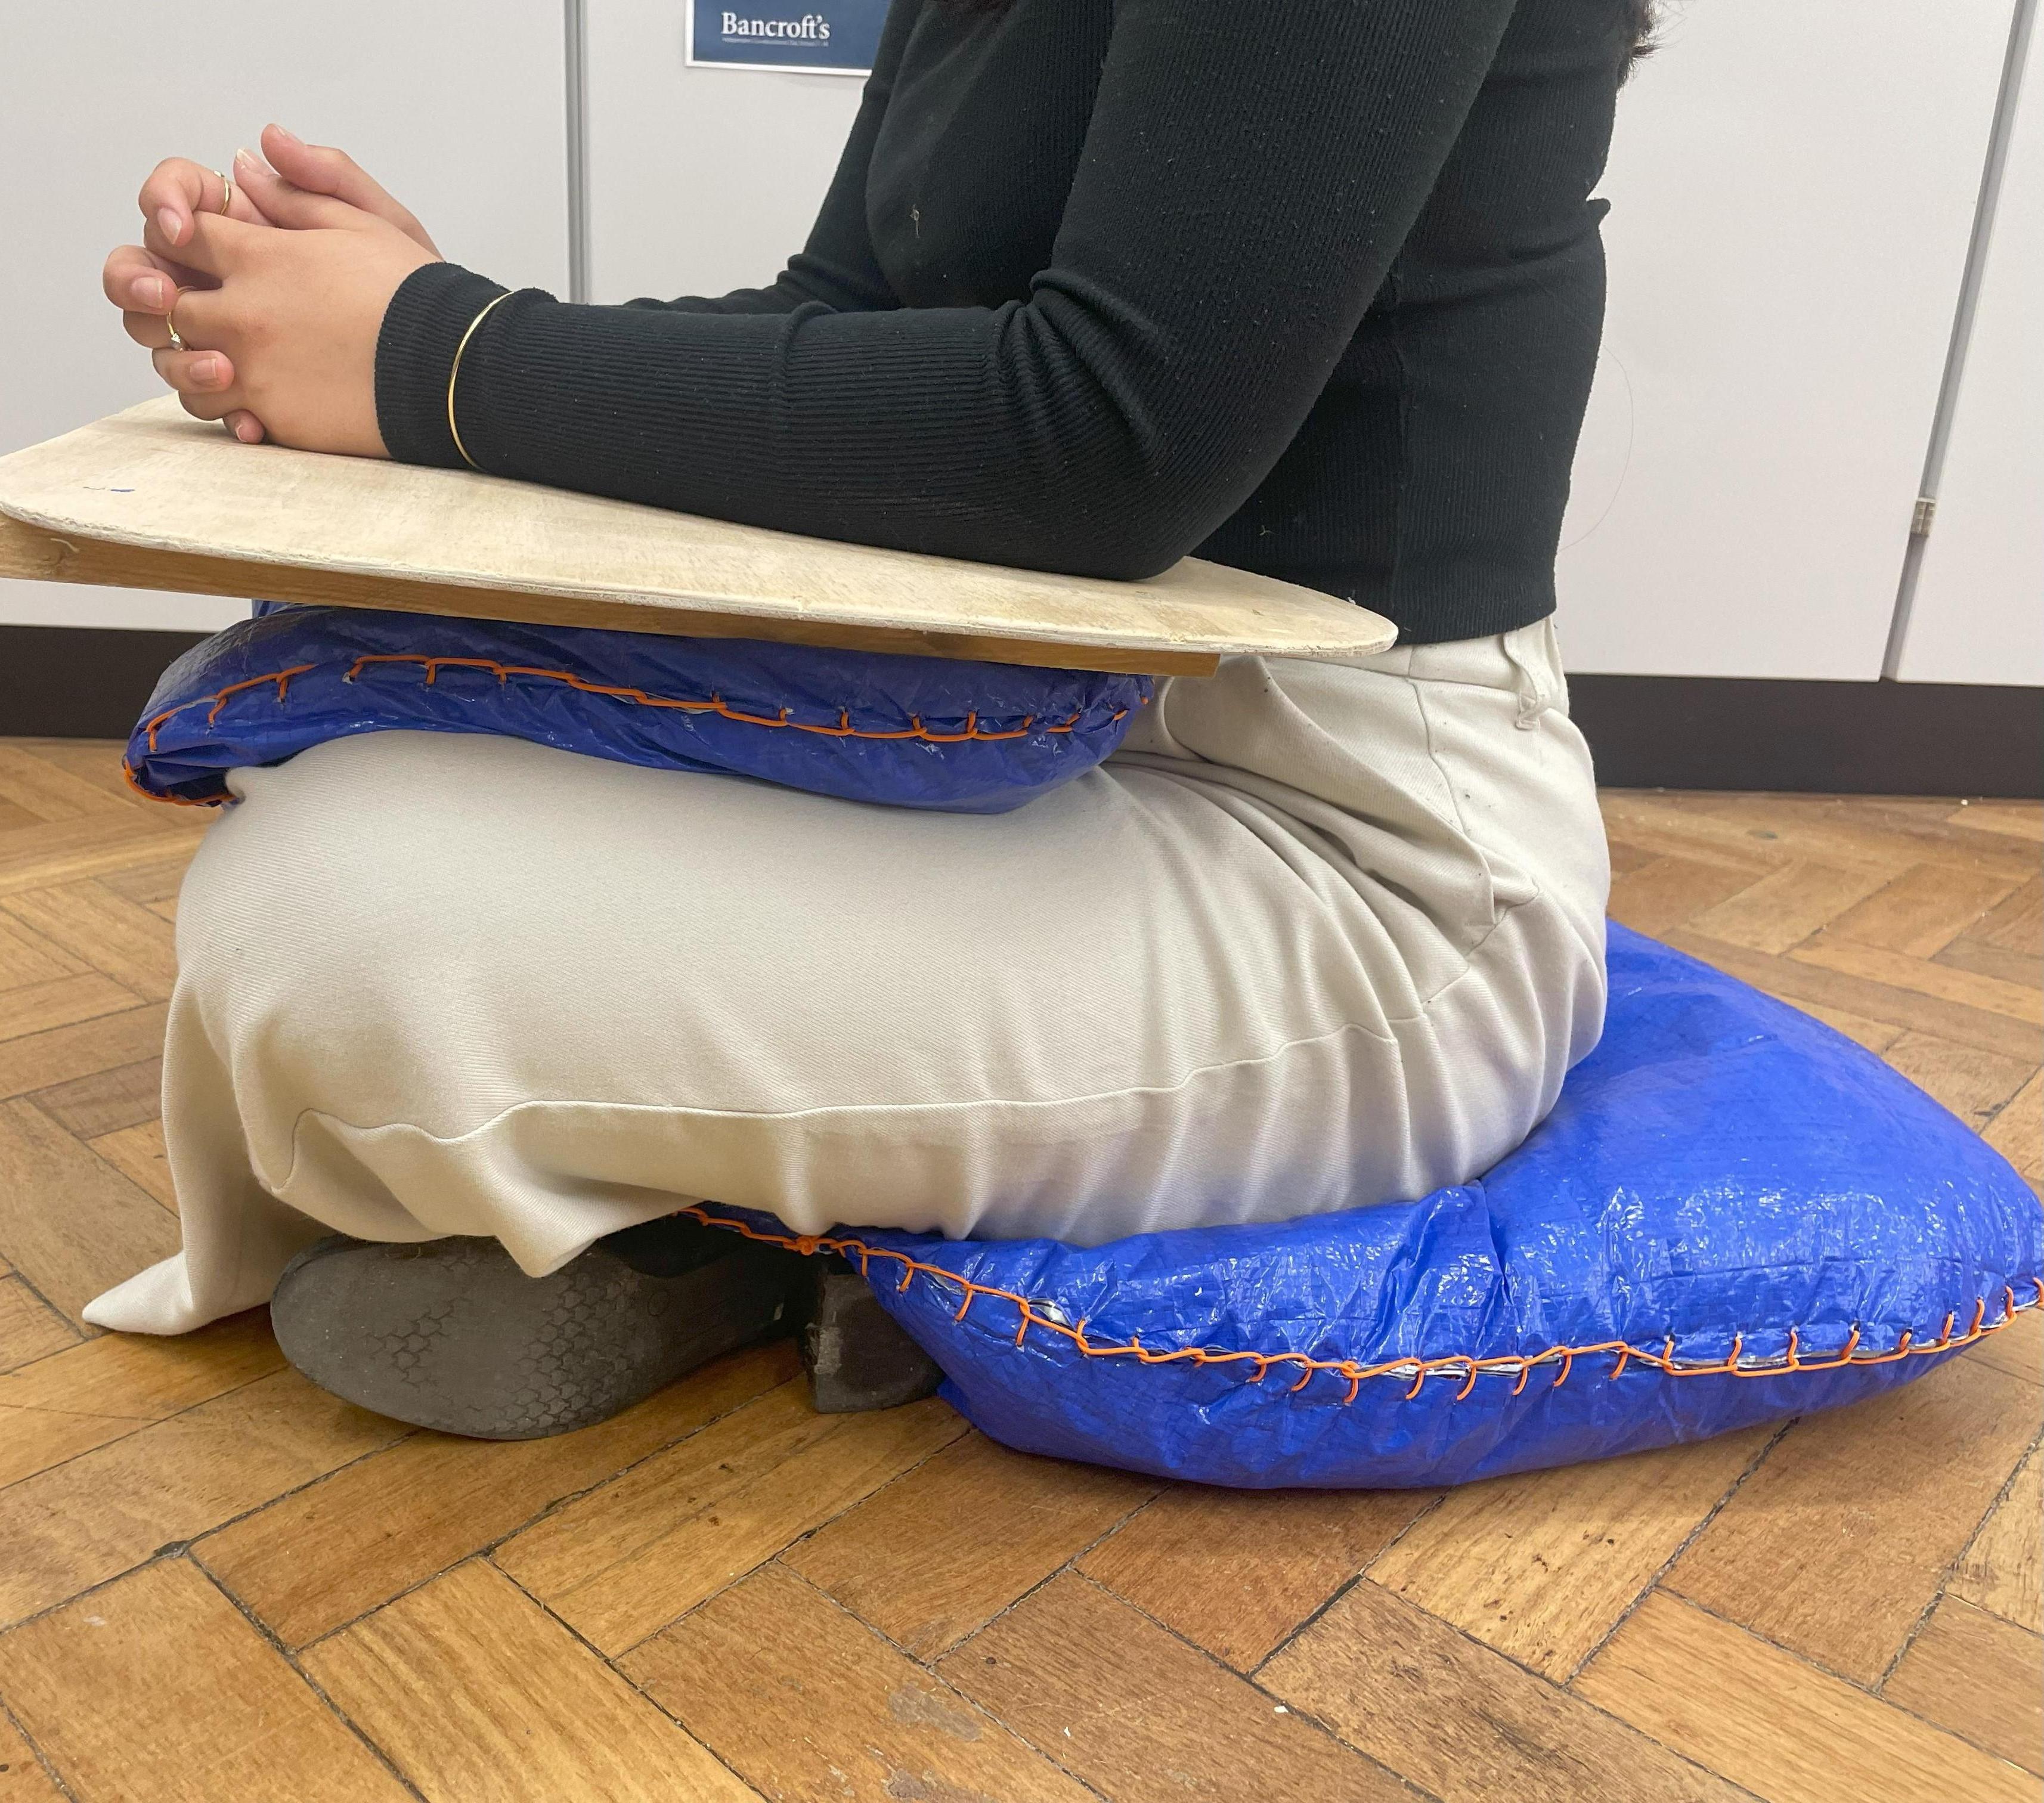 Portable Cushioned Lap Desk for Education in Remote Locations & Refugee Camps